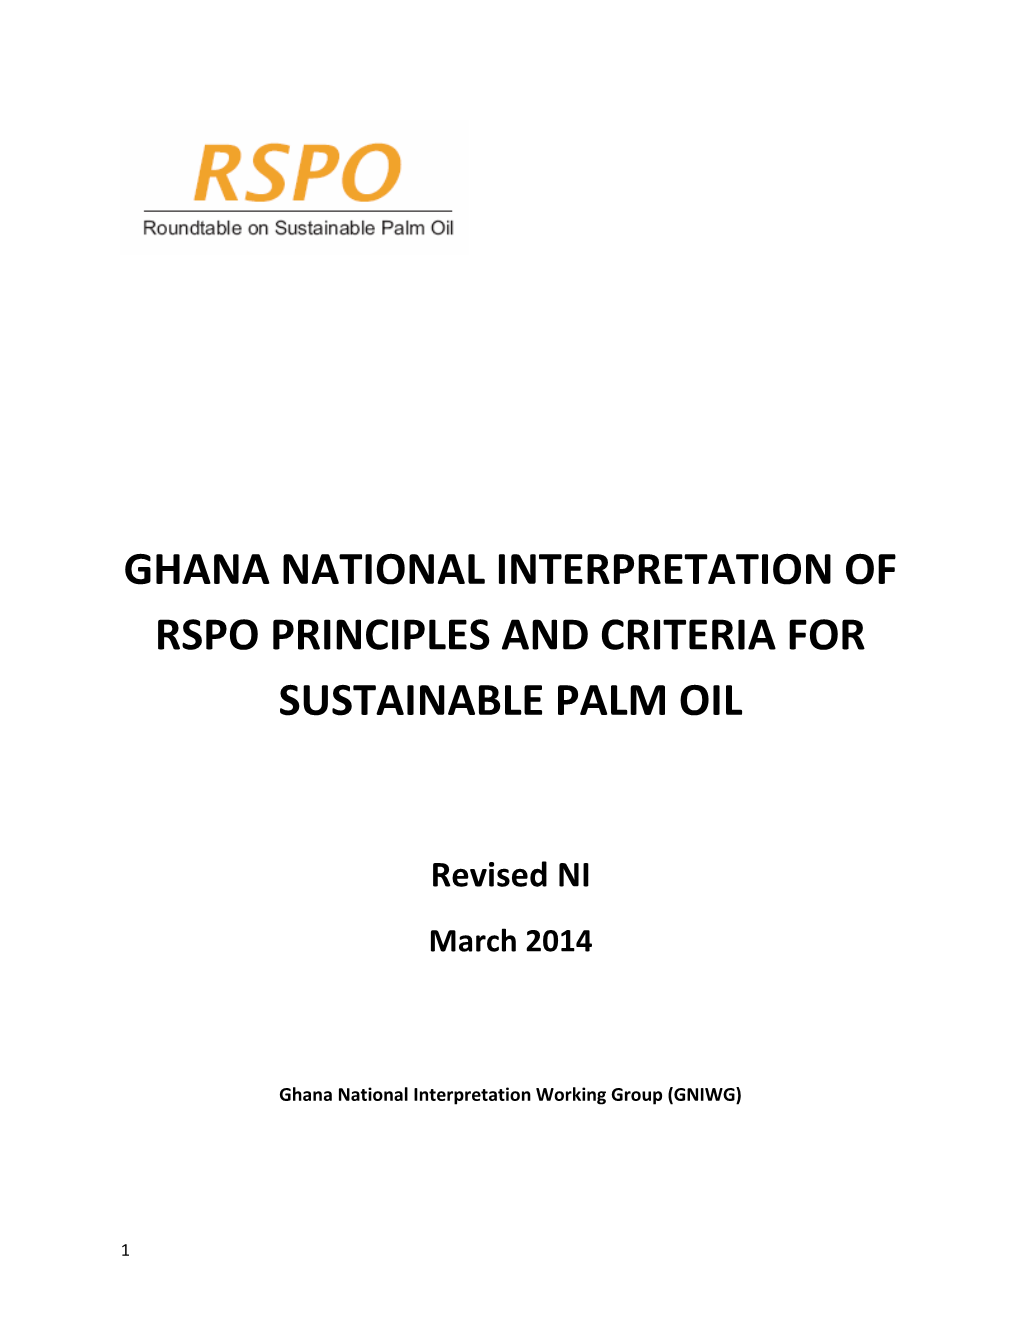 Ghana National Interpretation of Rspo Principles and Criteria for Sustainable Palm Oil